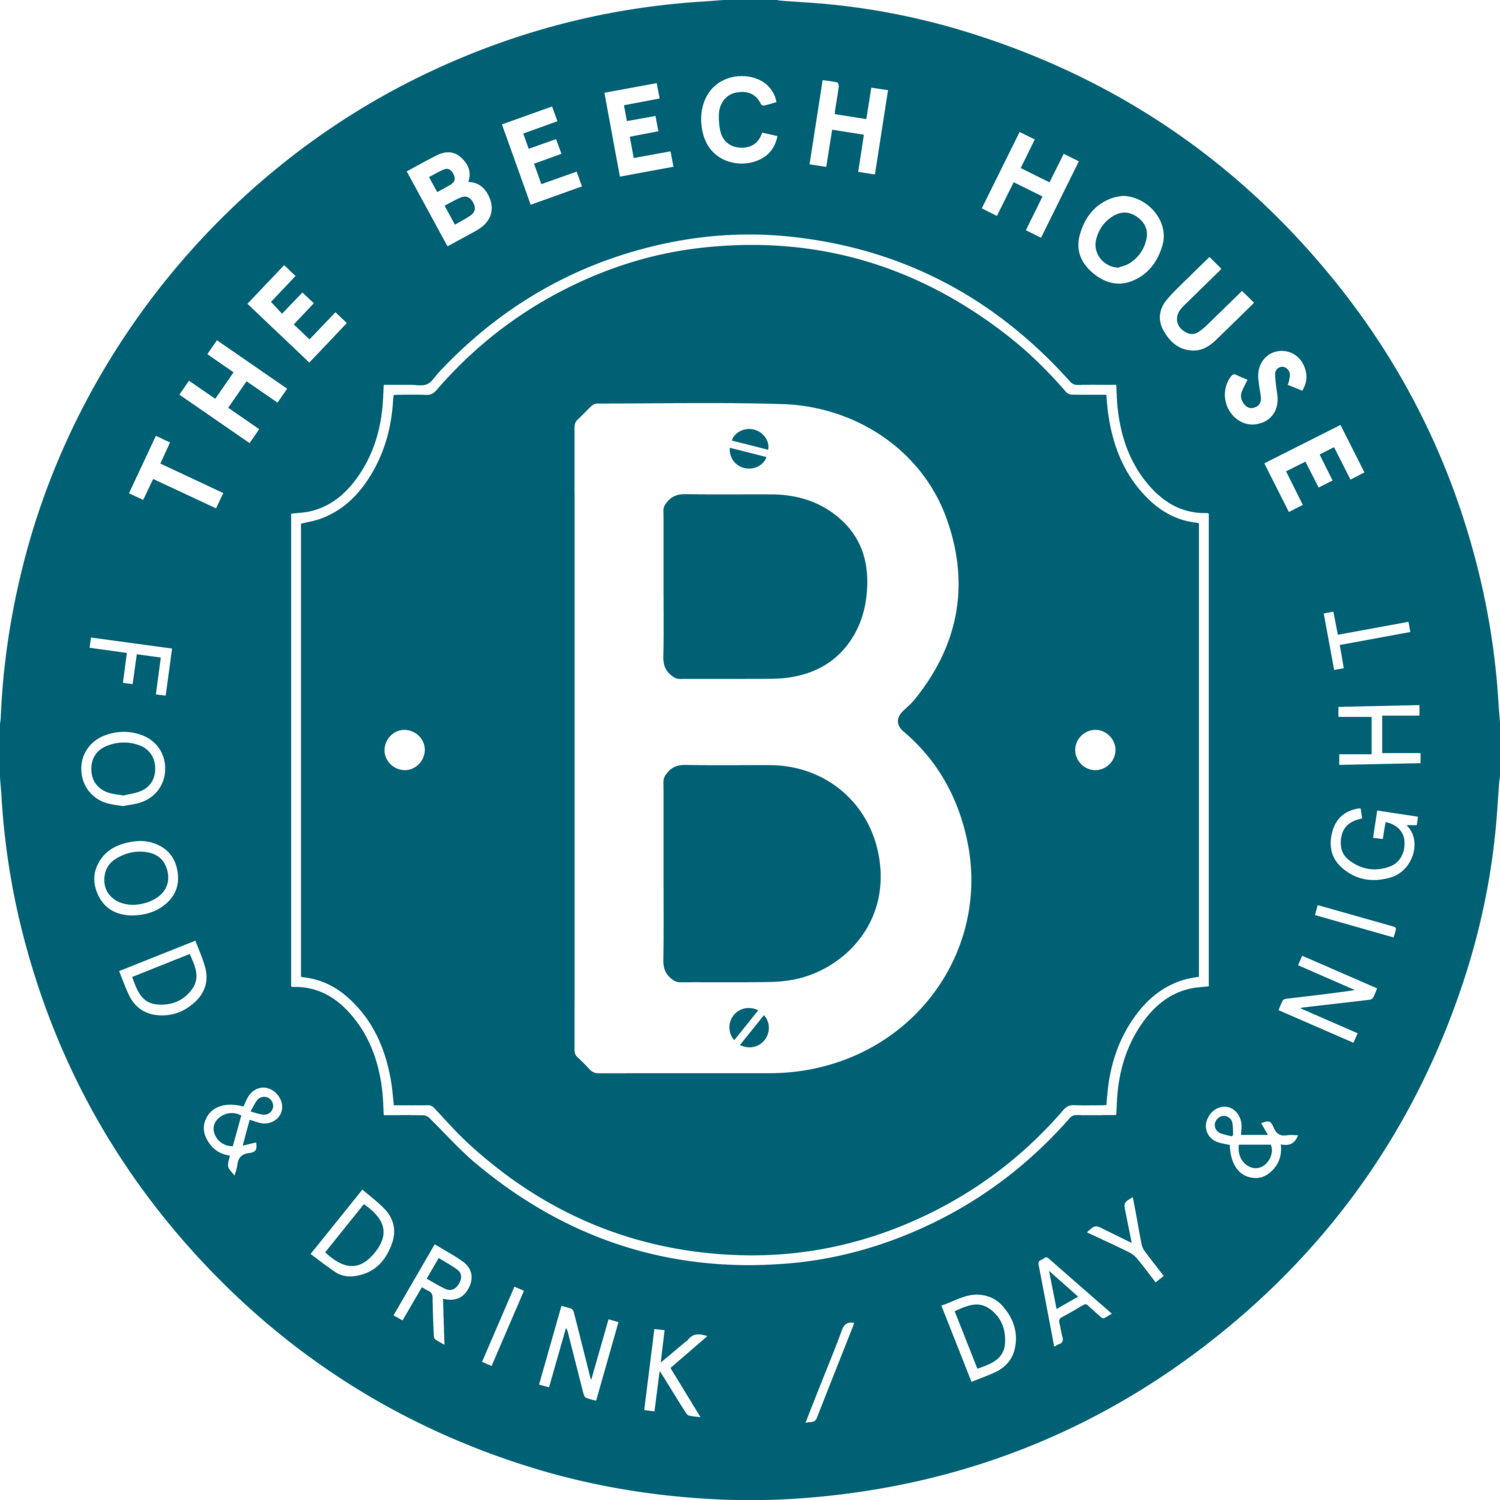 The Beech House – 10% Discount on food